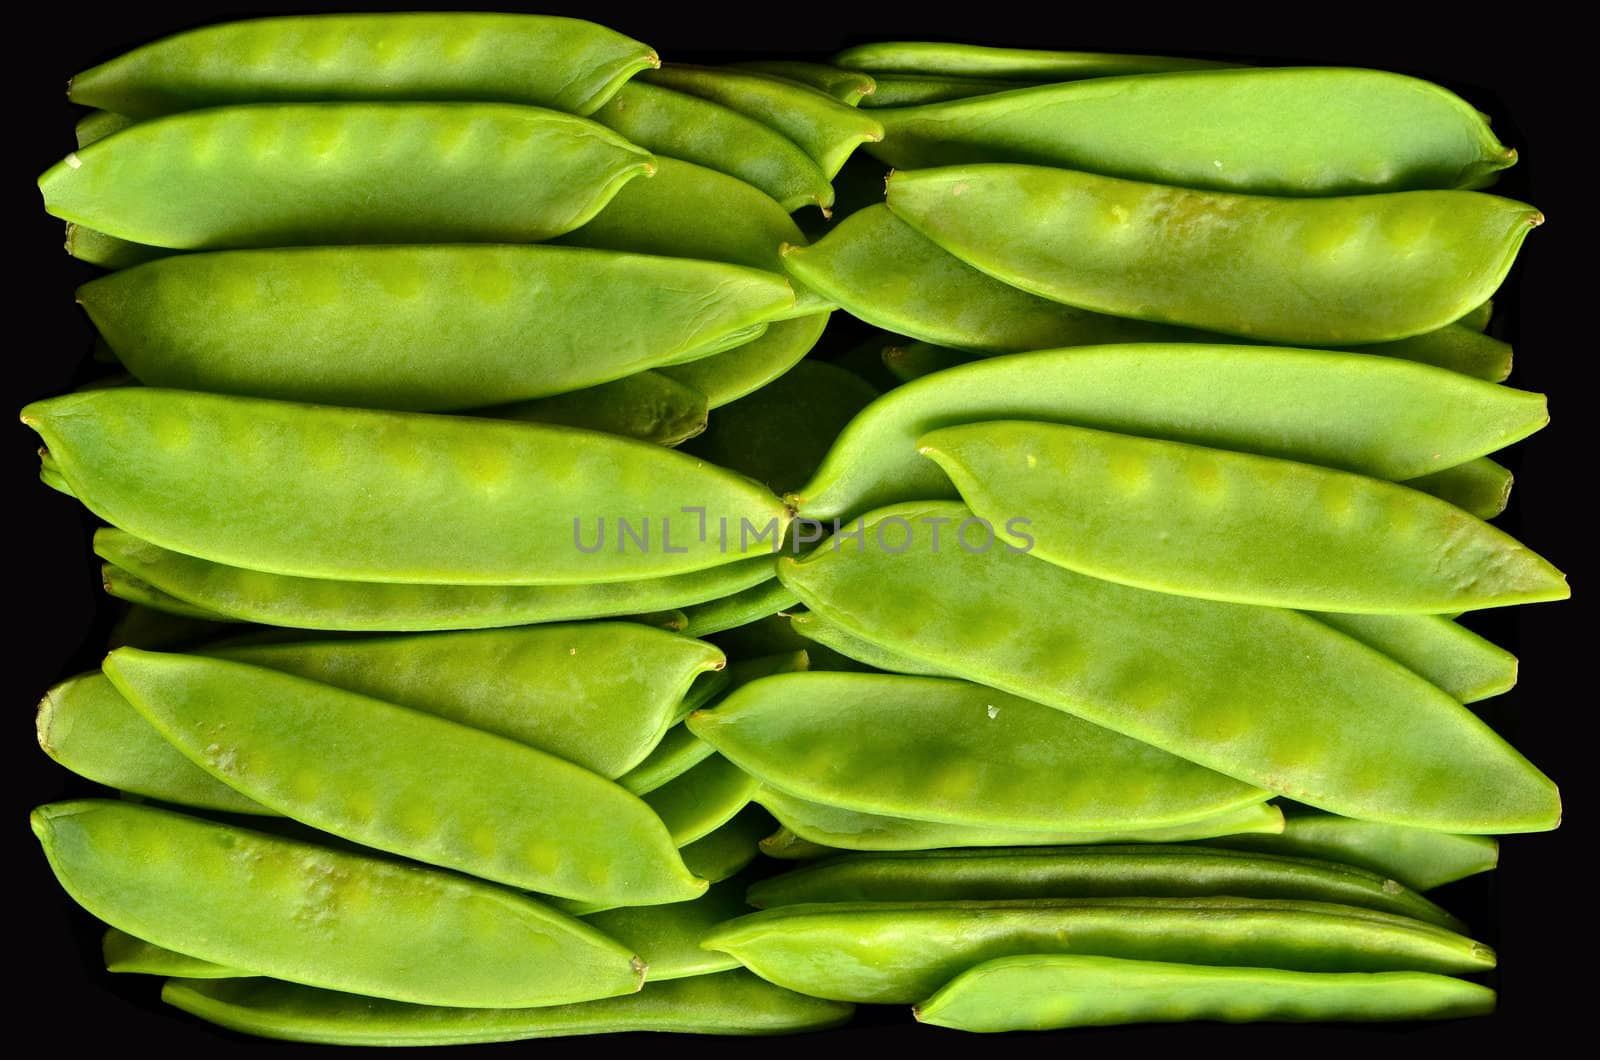 Food Texture Of Organic Fresh Snow Peas WIth Black Background